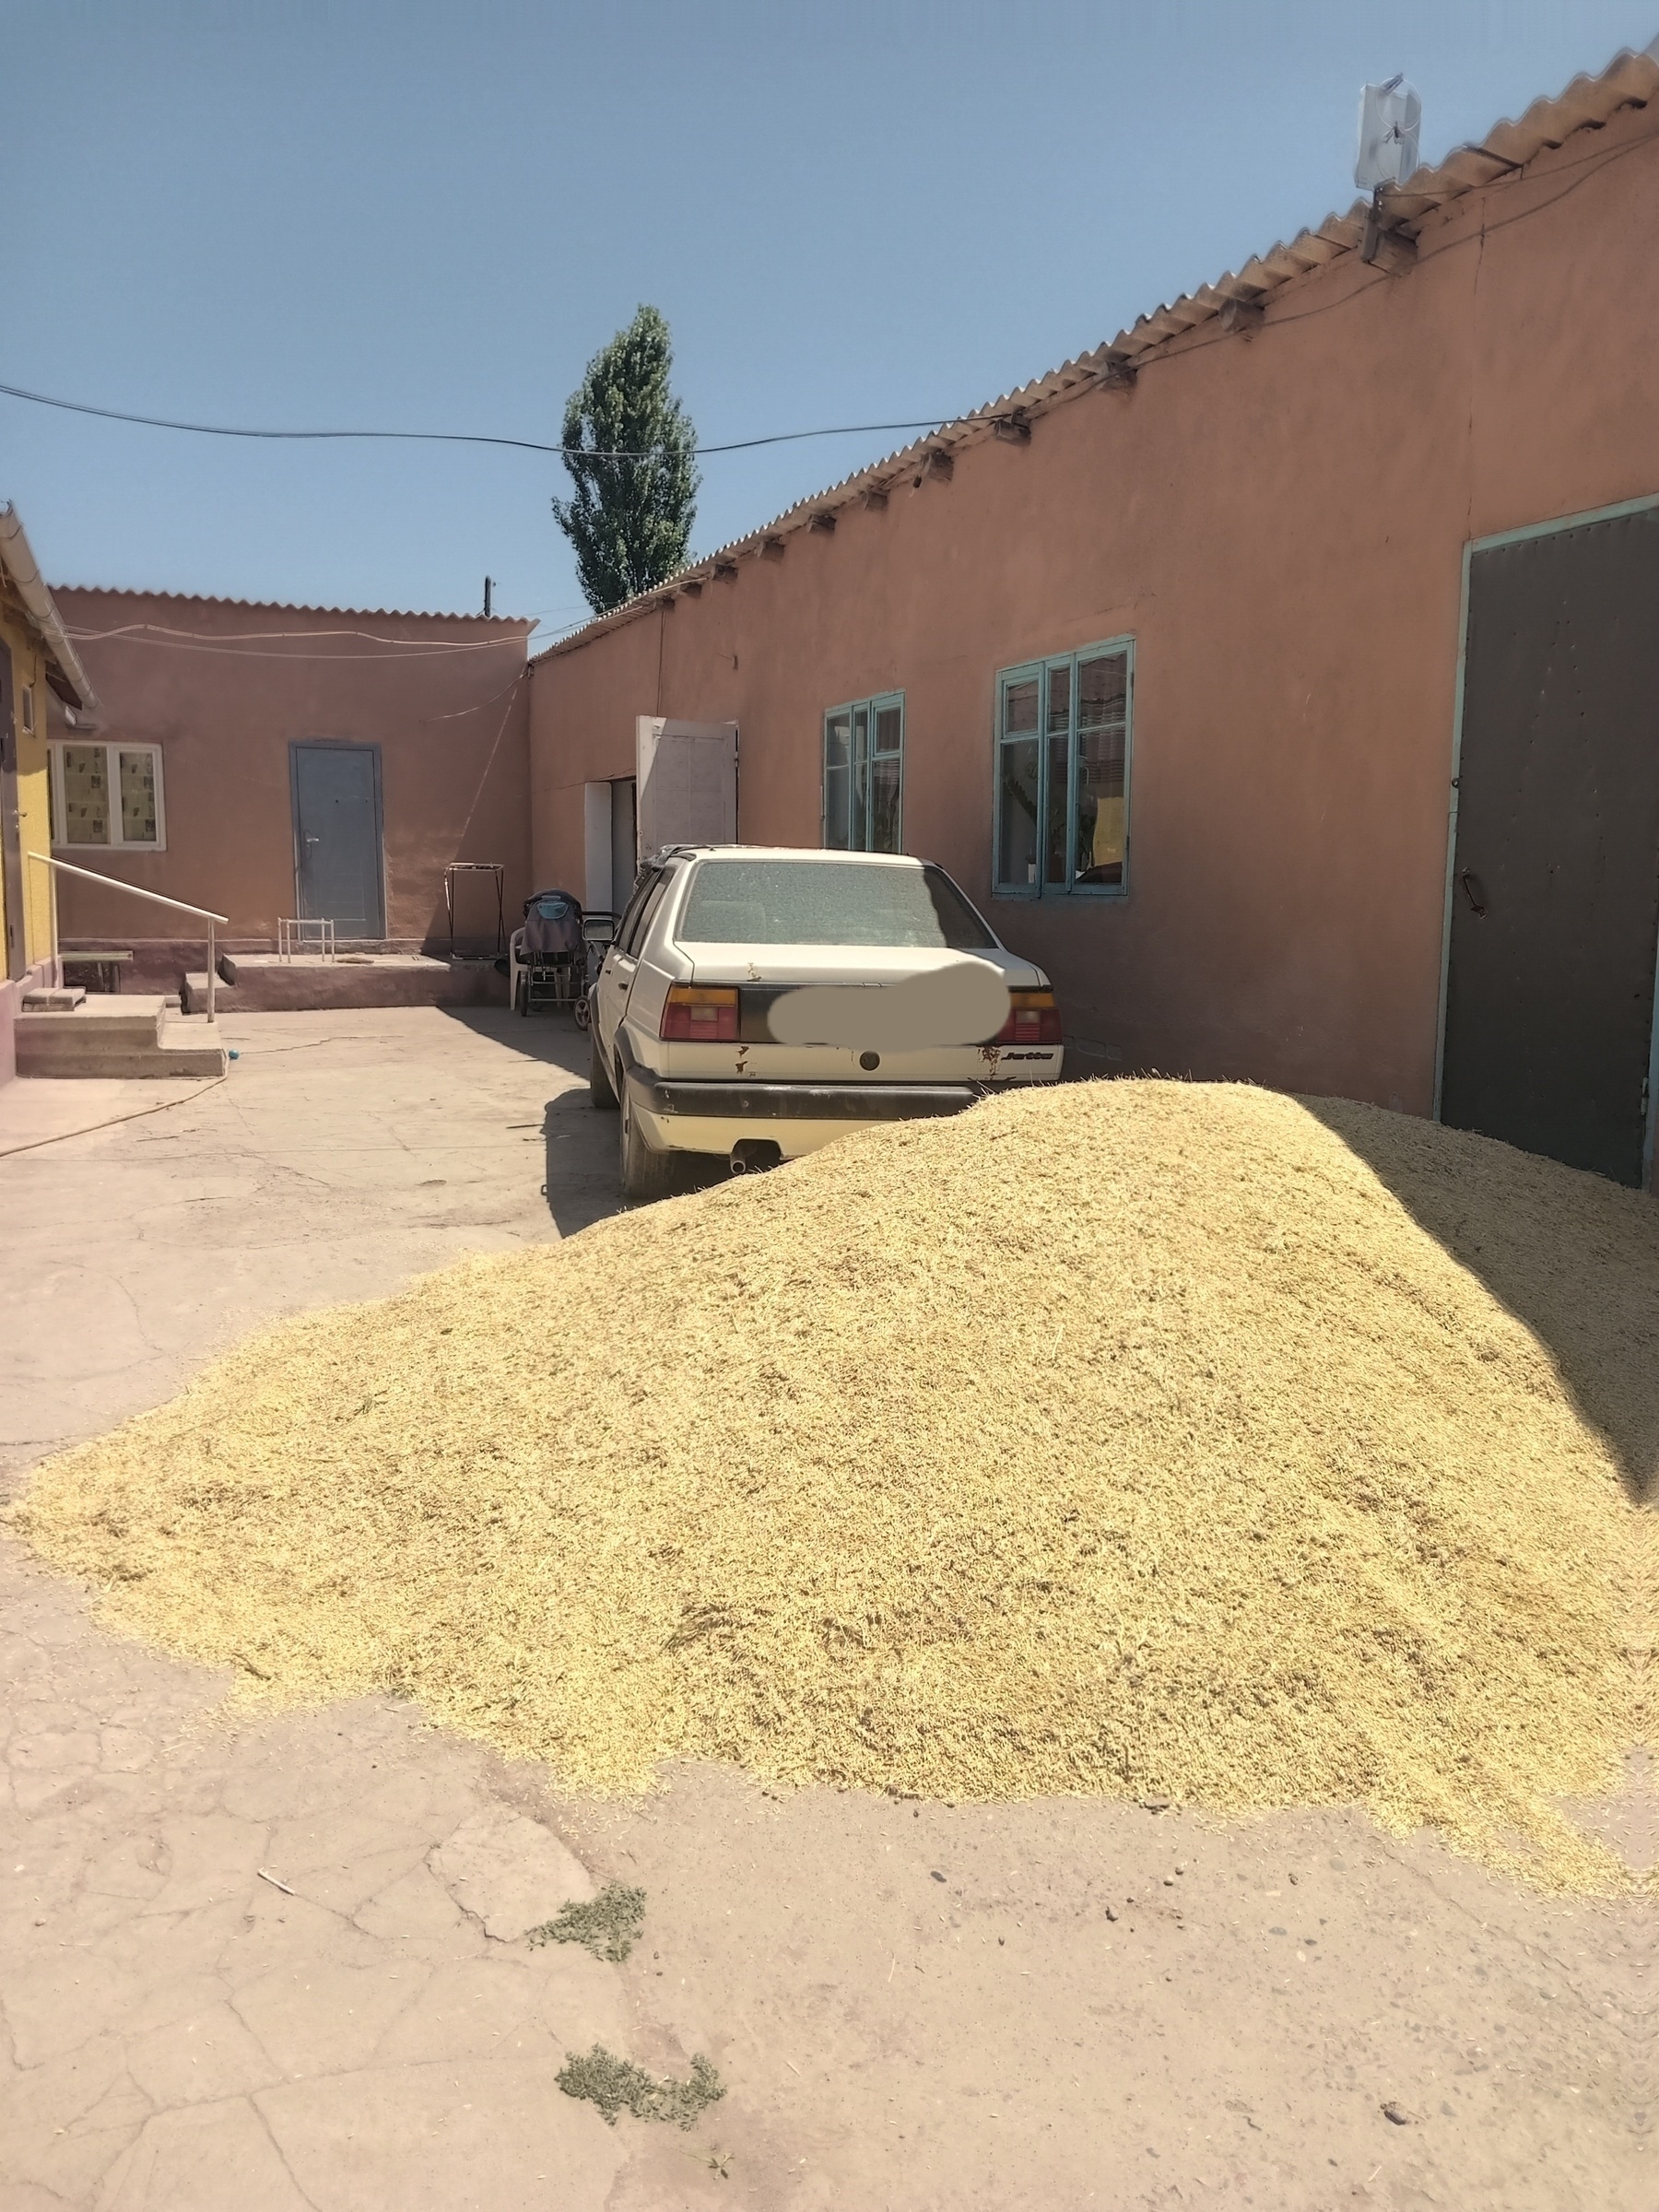 pile of yellow grain on the ground behind a car (almost as high as the top of the trunk) and next to an orange house